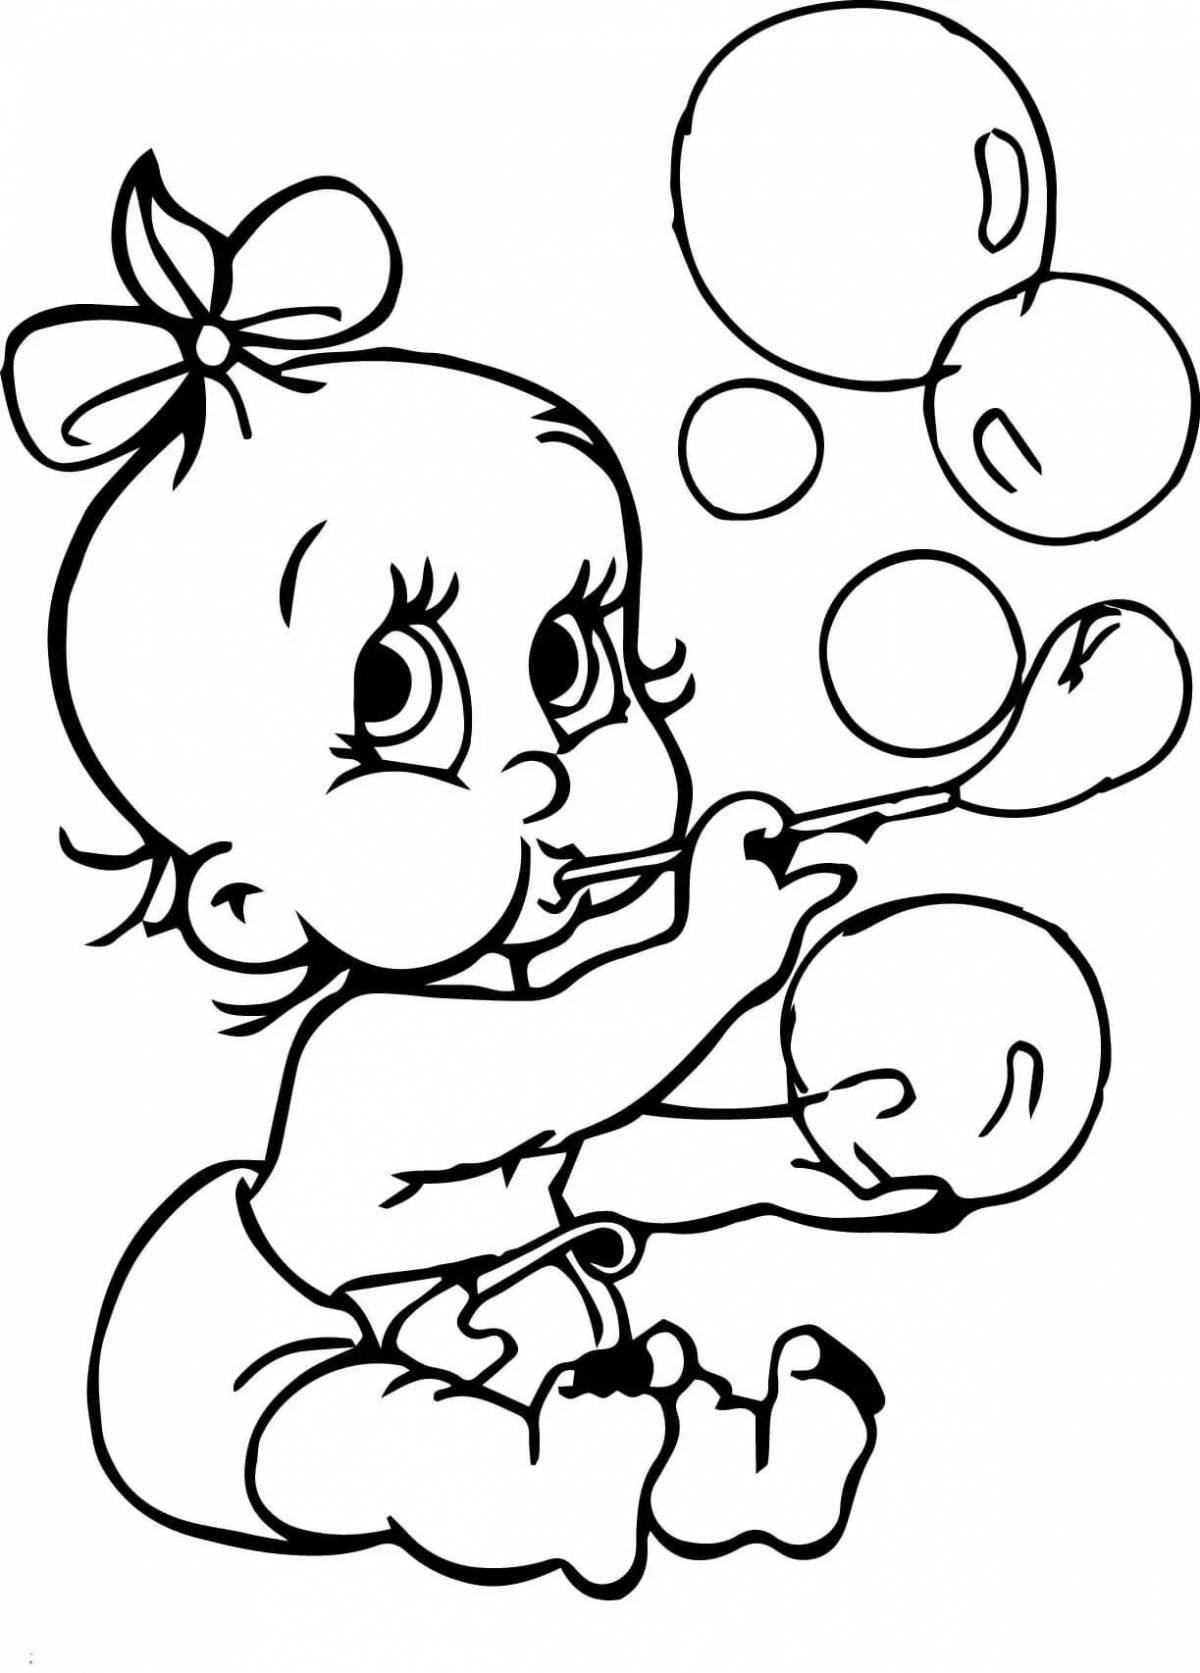 Colour explosion coloring pages for kids